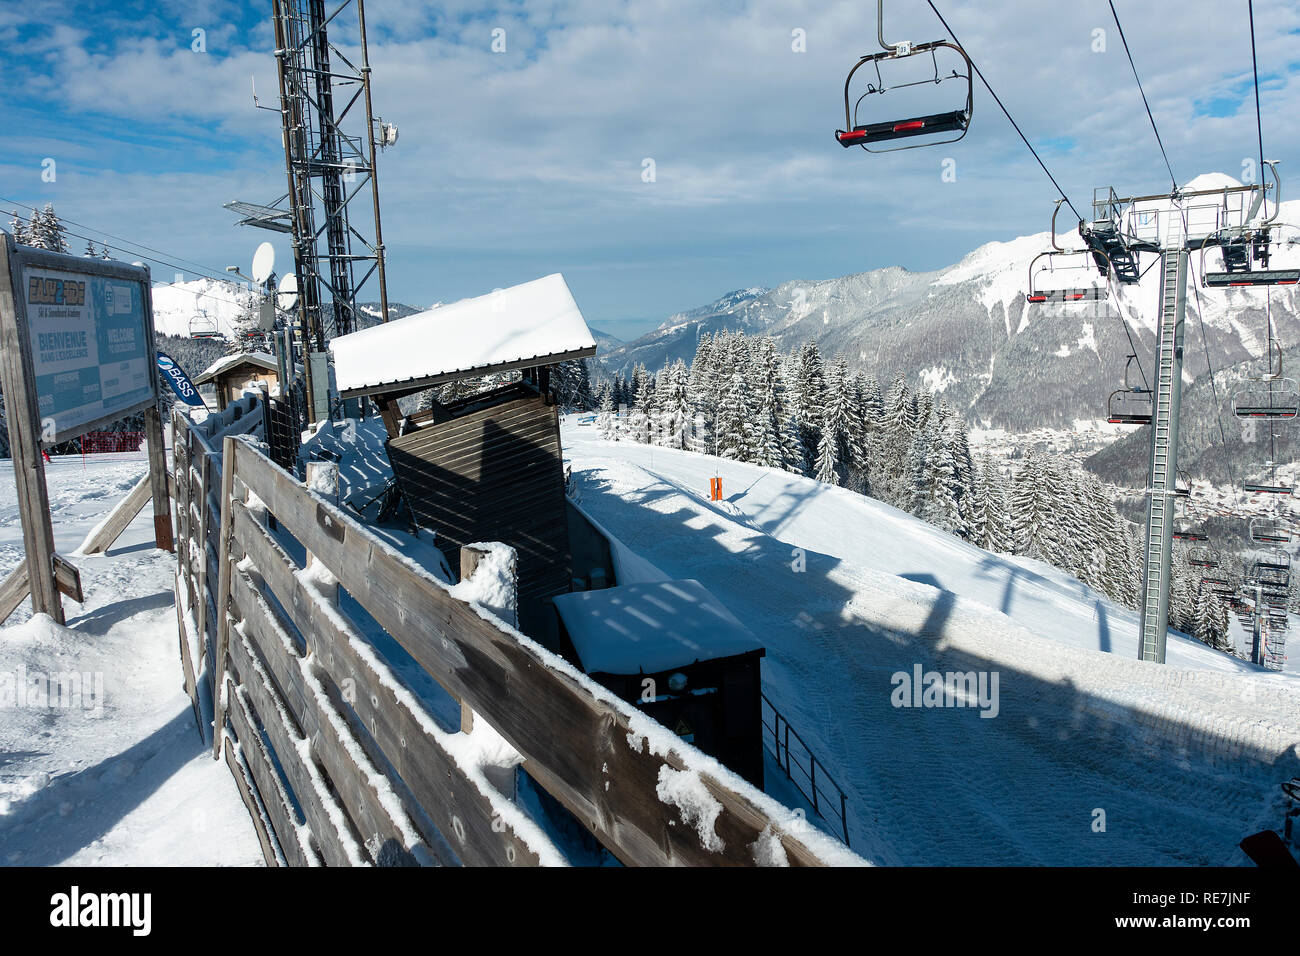 The Mouilles Chairlift Transporting Skiers up the Ski Slopes to the Le Pleney Gondola Area in Mountains above Morzine Ski Resort Haute Savoie France Stock Photo